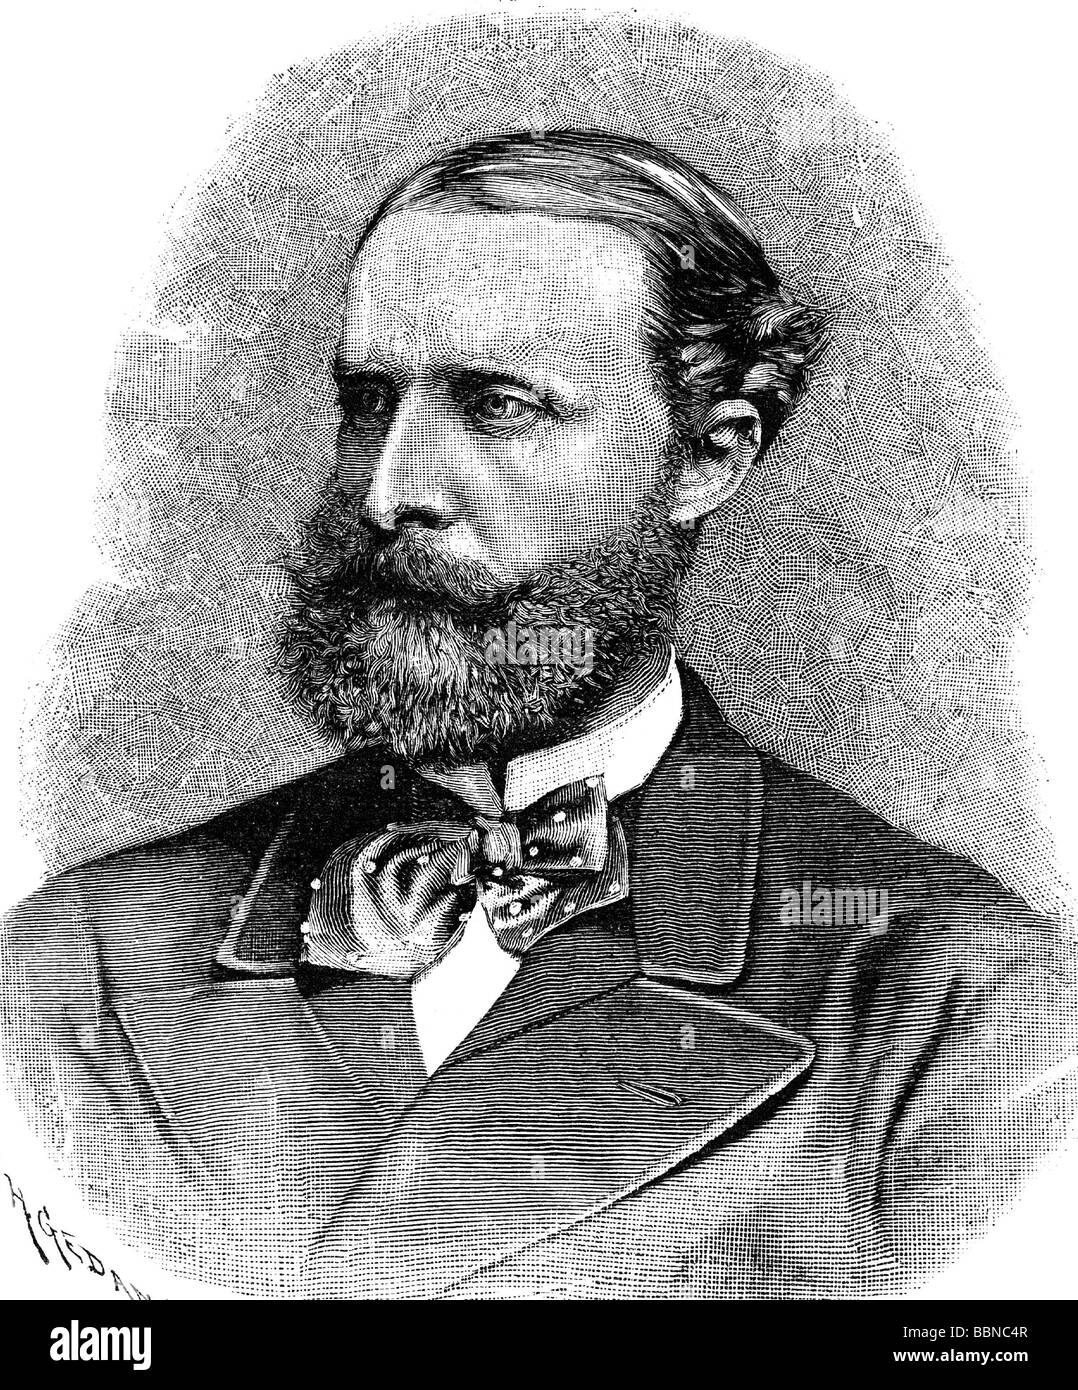 Lehndorff, Georg Graf, 4.12.1833 - 30.4.1914, royal Prussian head equerry and director of the Prussian stud farm administration 1887 - 1912, portrait, wood engraving, circa 1880, Stock Photo